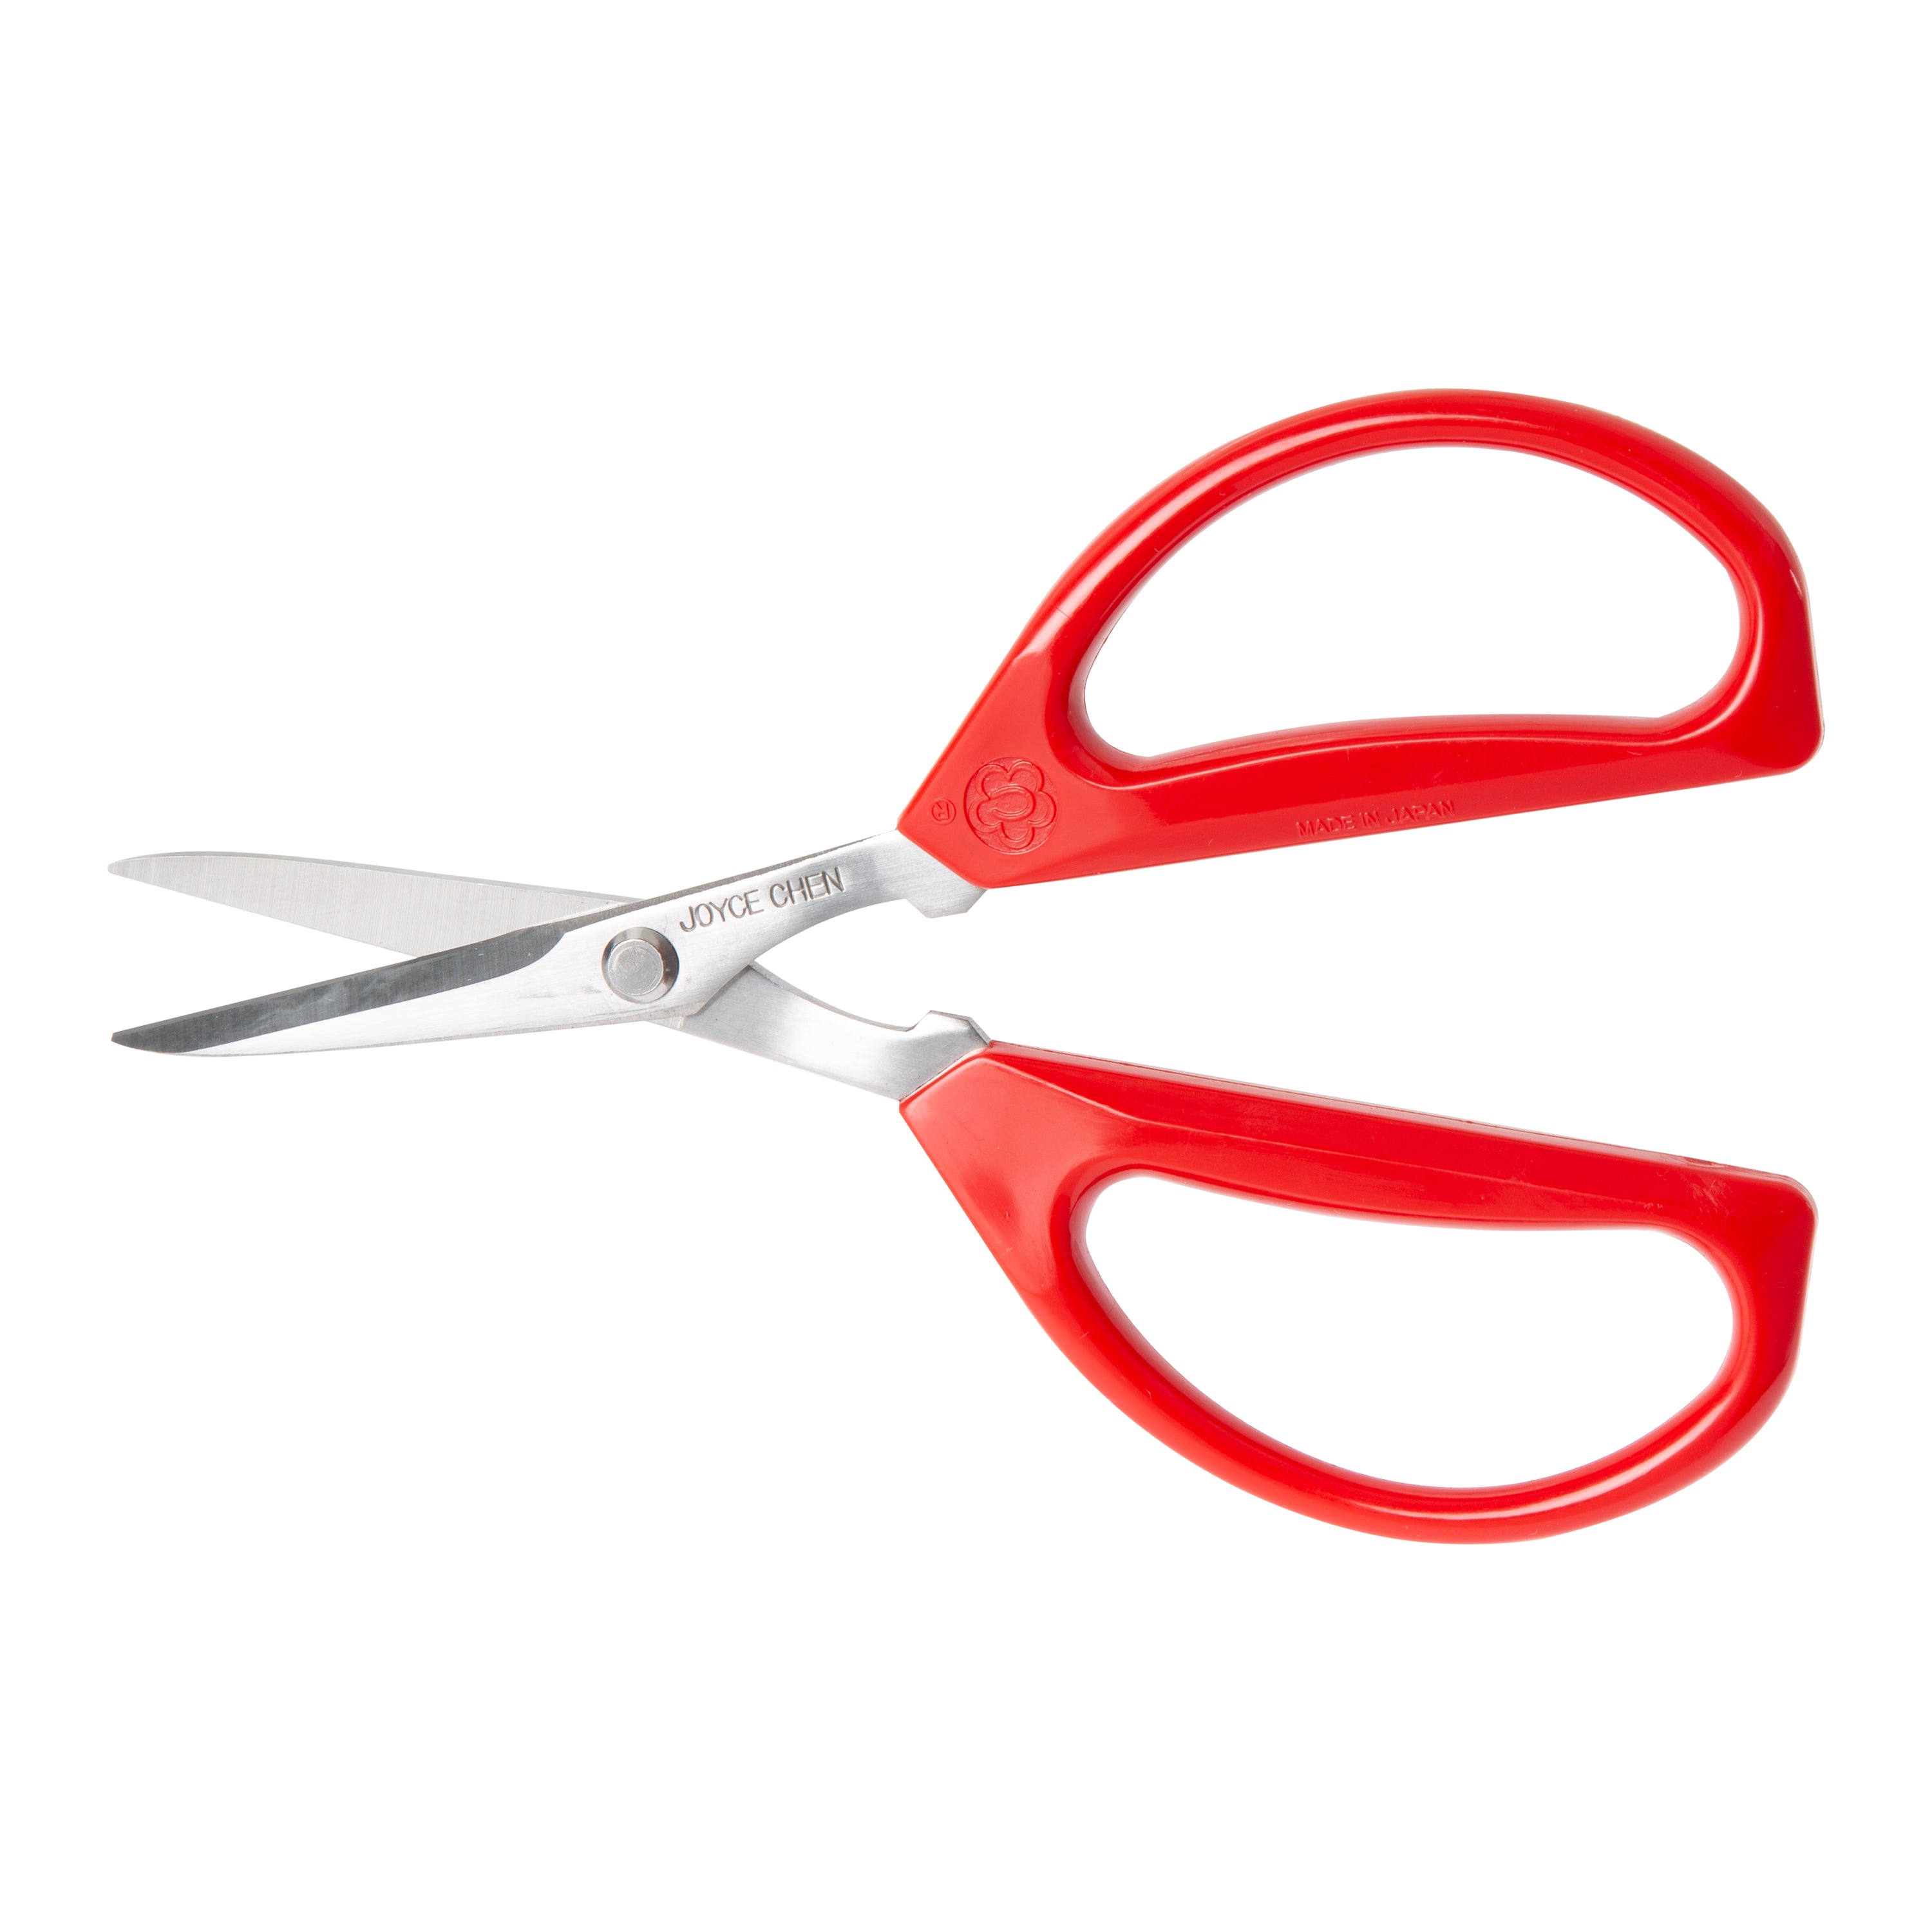 10 Spring Loaded Kitchen Scissors With Safety Lock Feature - SC